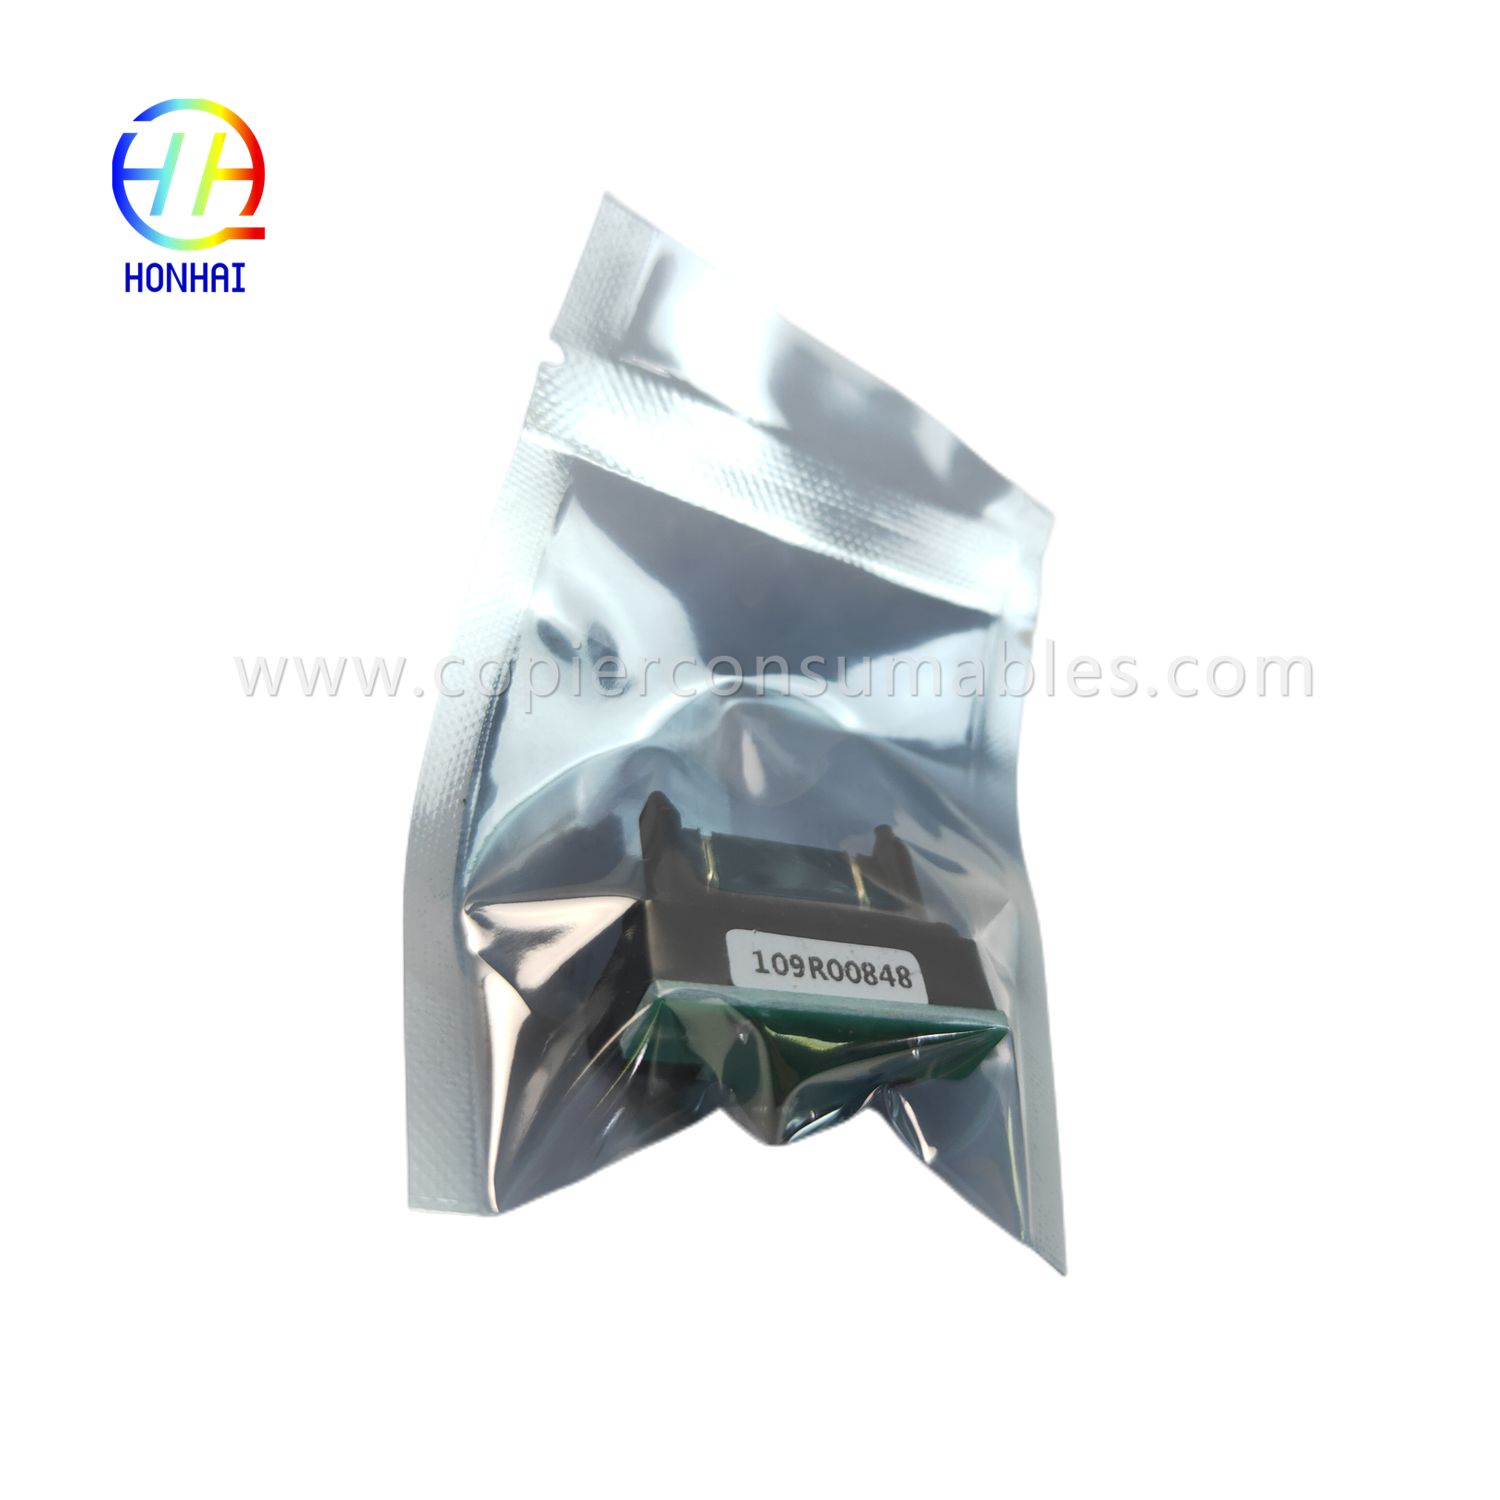 Fuser chip cha xerox workcentre 5945 5955 109R00848 chip (5)_副本